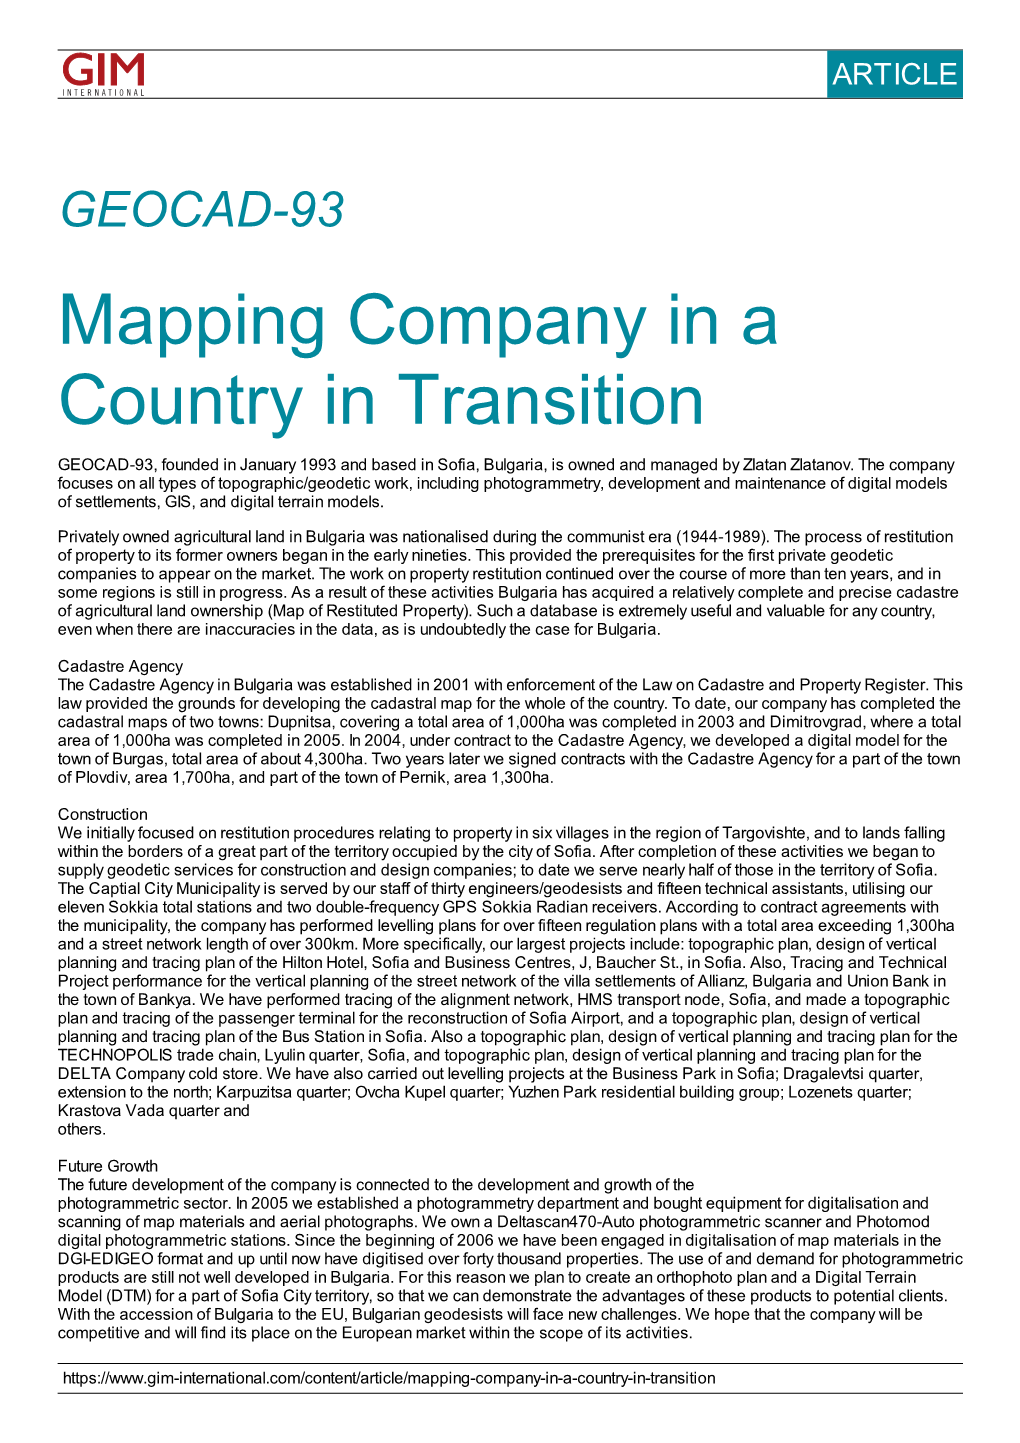 Mapping Company in a Country in Transition